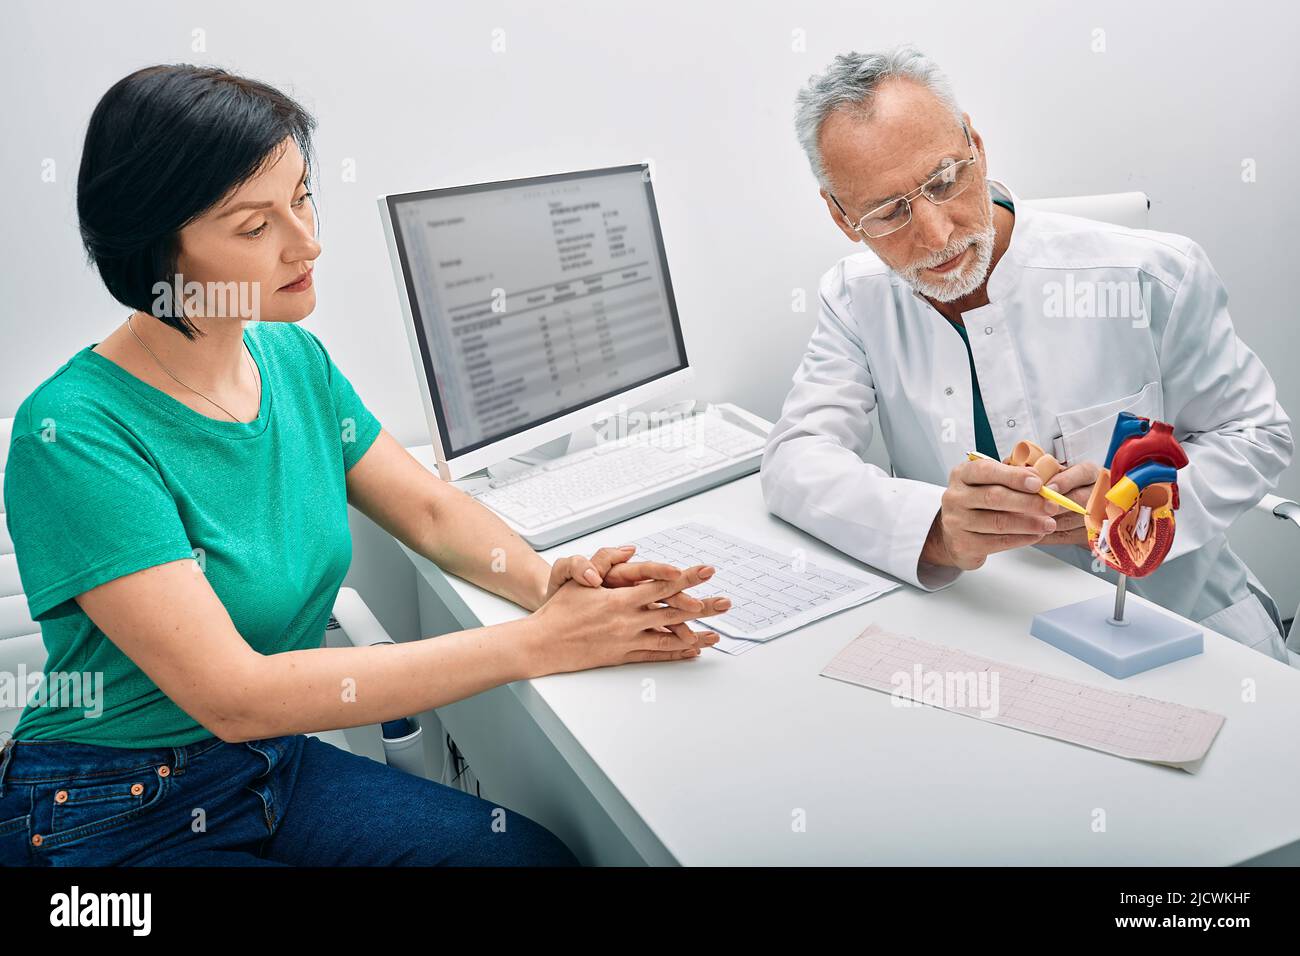 Cardiologist showing structure and anatomy of human heart using medical teaching model of heart while consultation for female patient Stock Photo